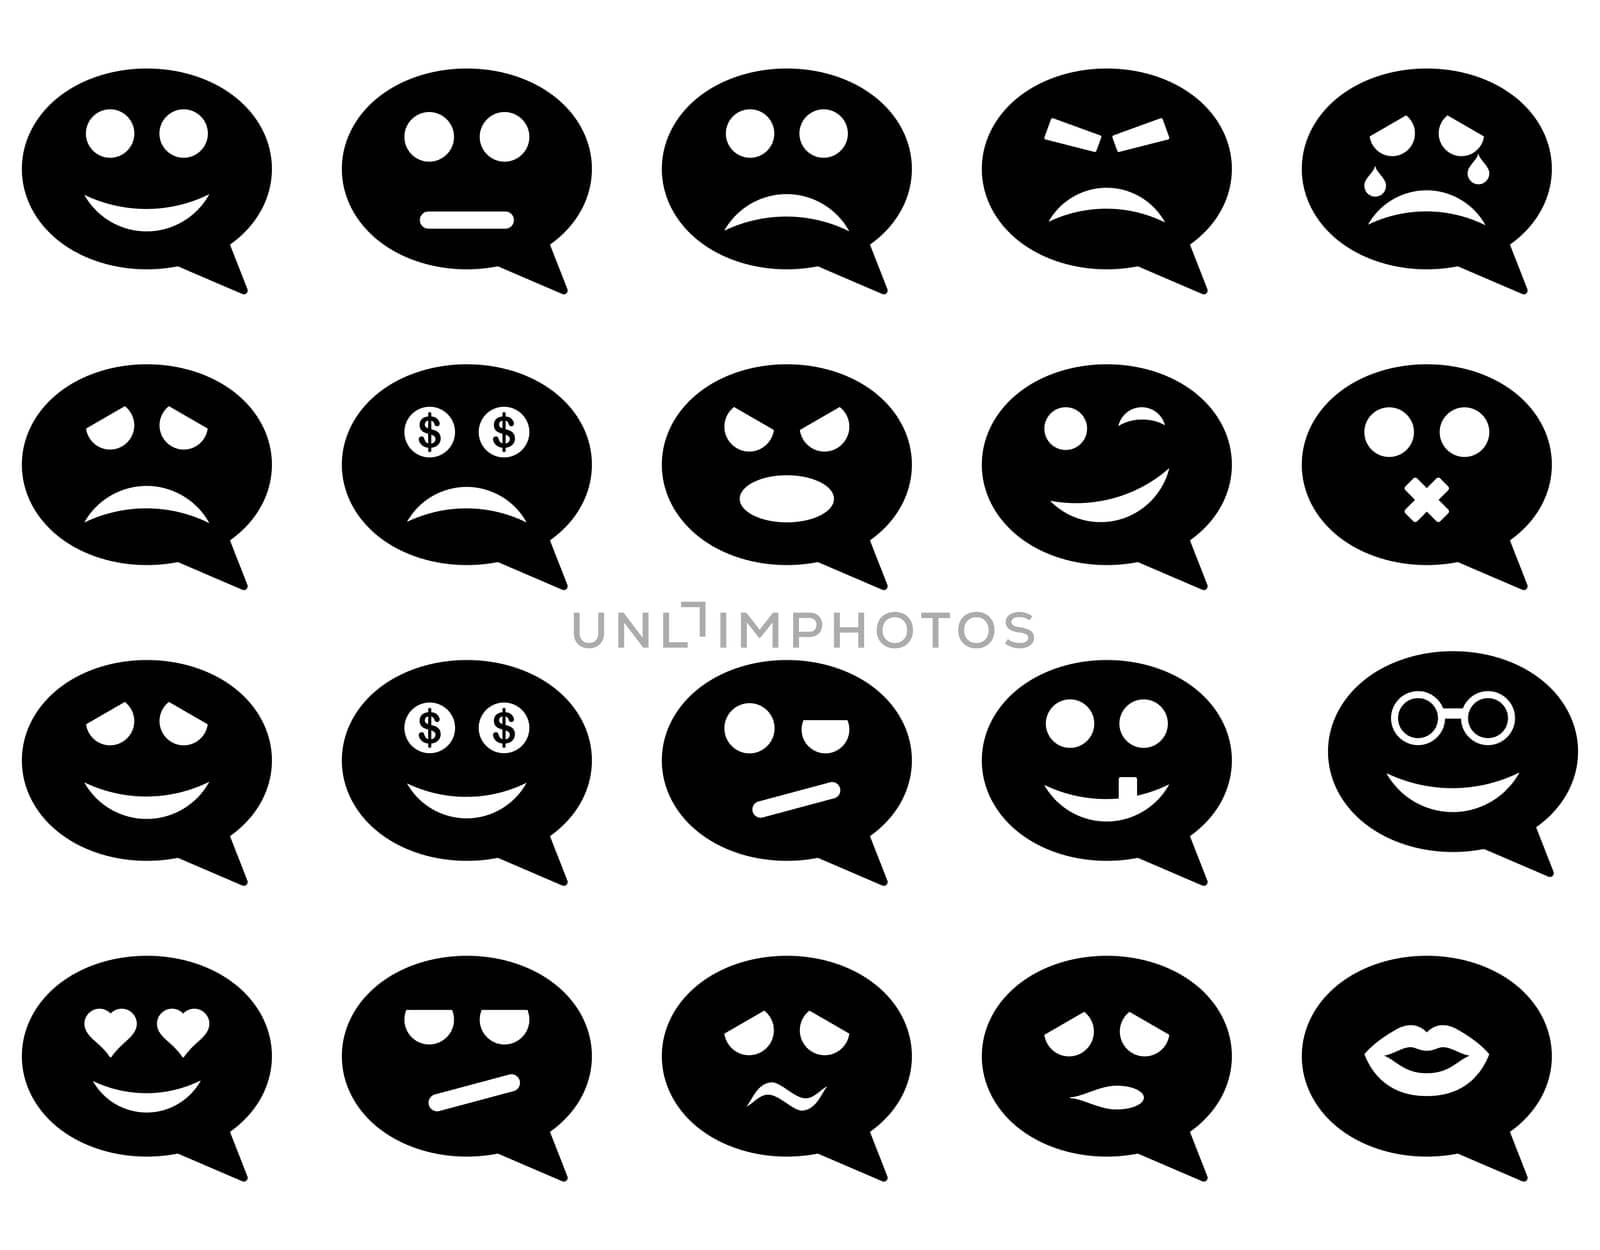 Chat emotion smile icons. Glyph set style is flat images, black symbols, isolated on a white background.